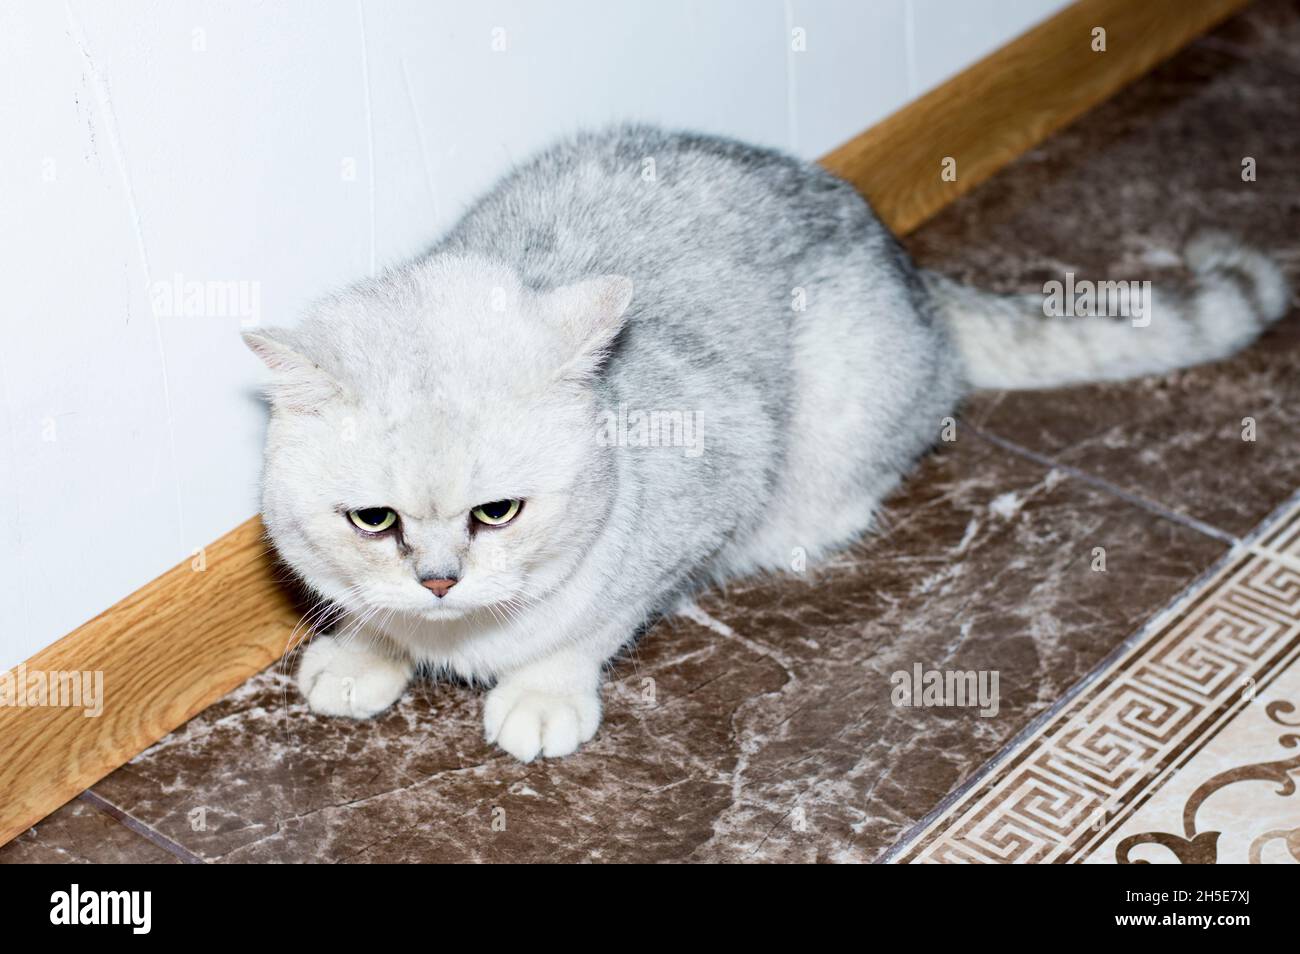 Silver shaded chinchilla, theme domestic cats and kittens Stock Photo